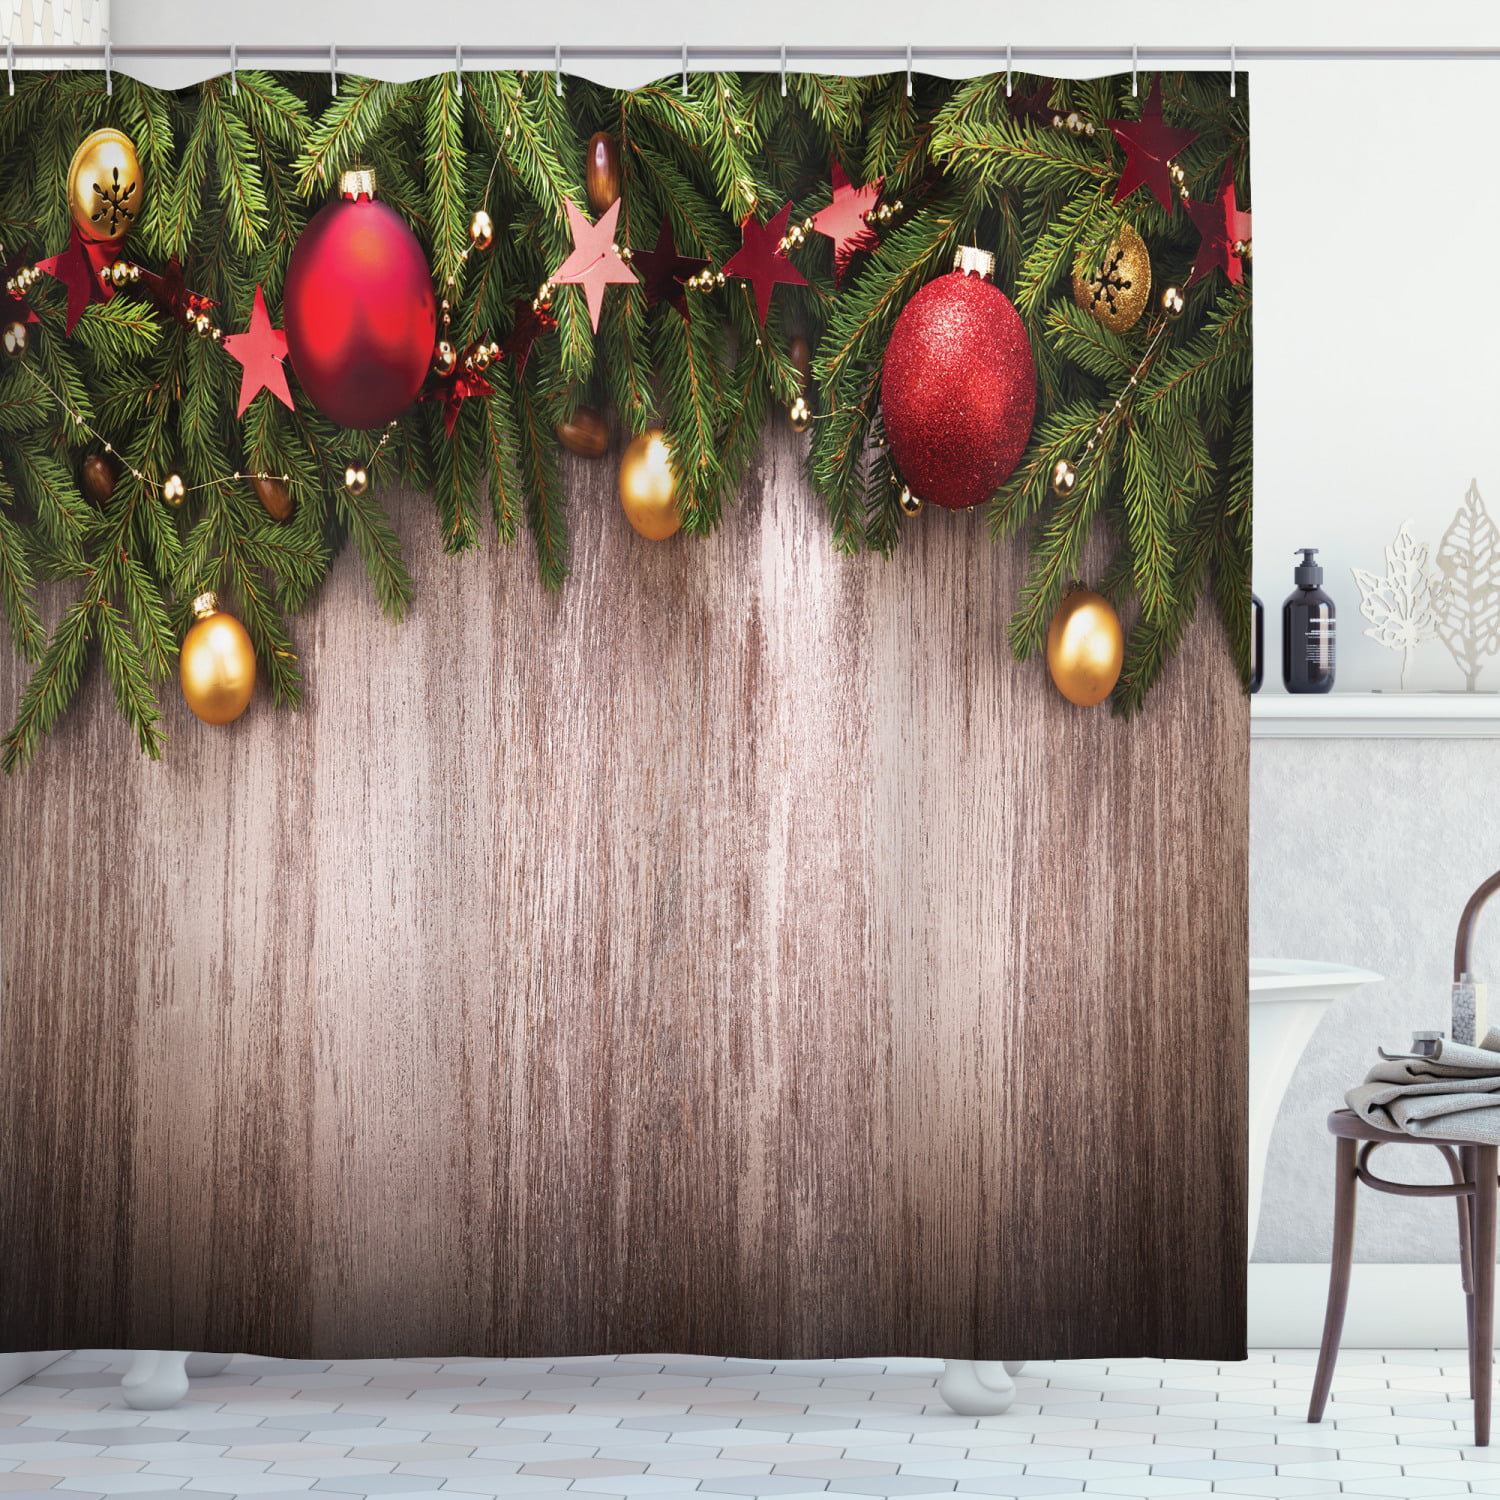 Christmas Ball Candy Cane Rustic Wood Plank Waterproof Fabric Shower Curtain Set 